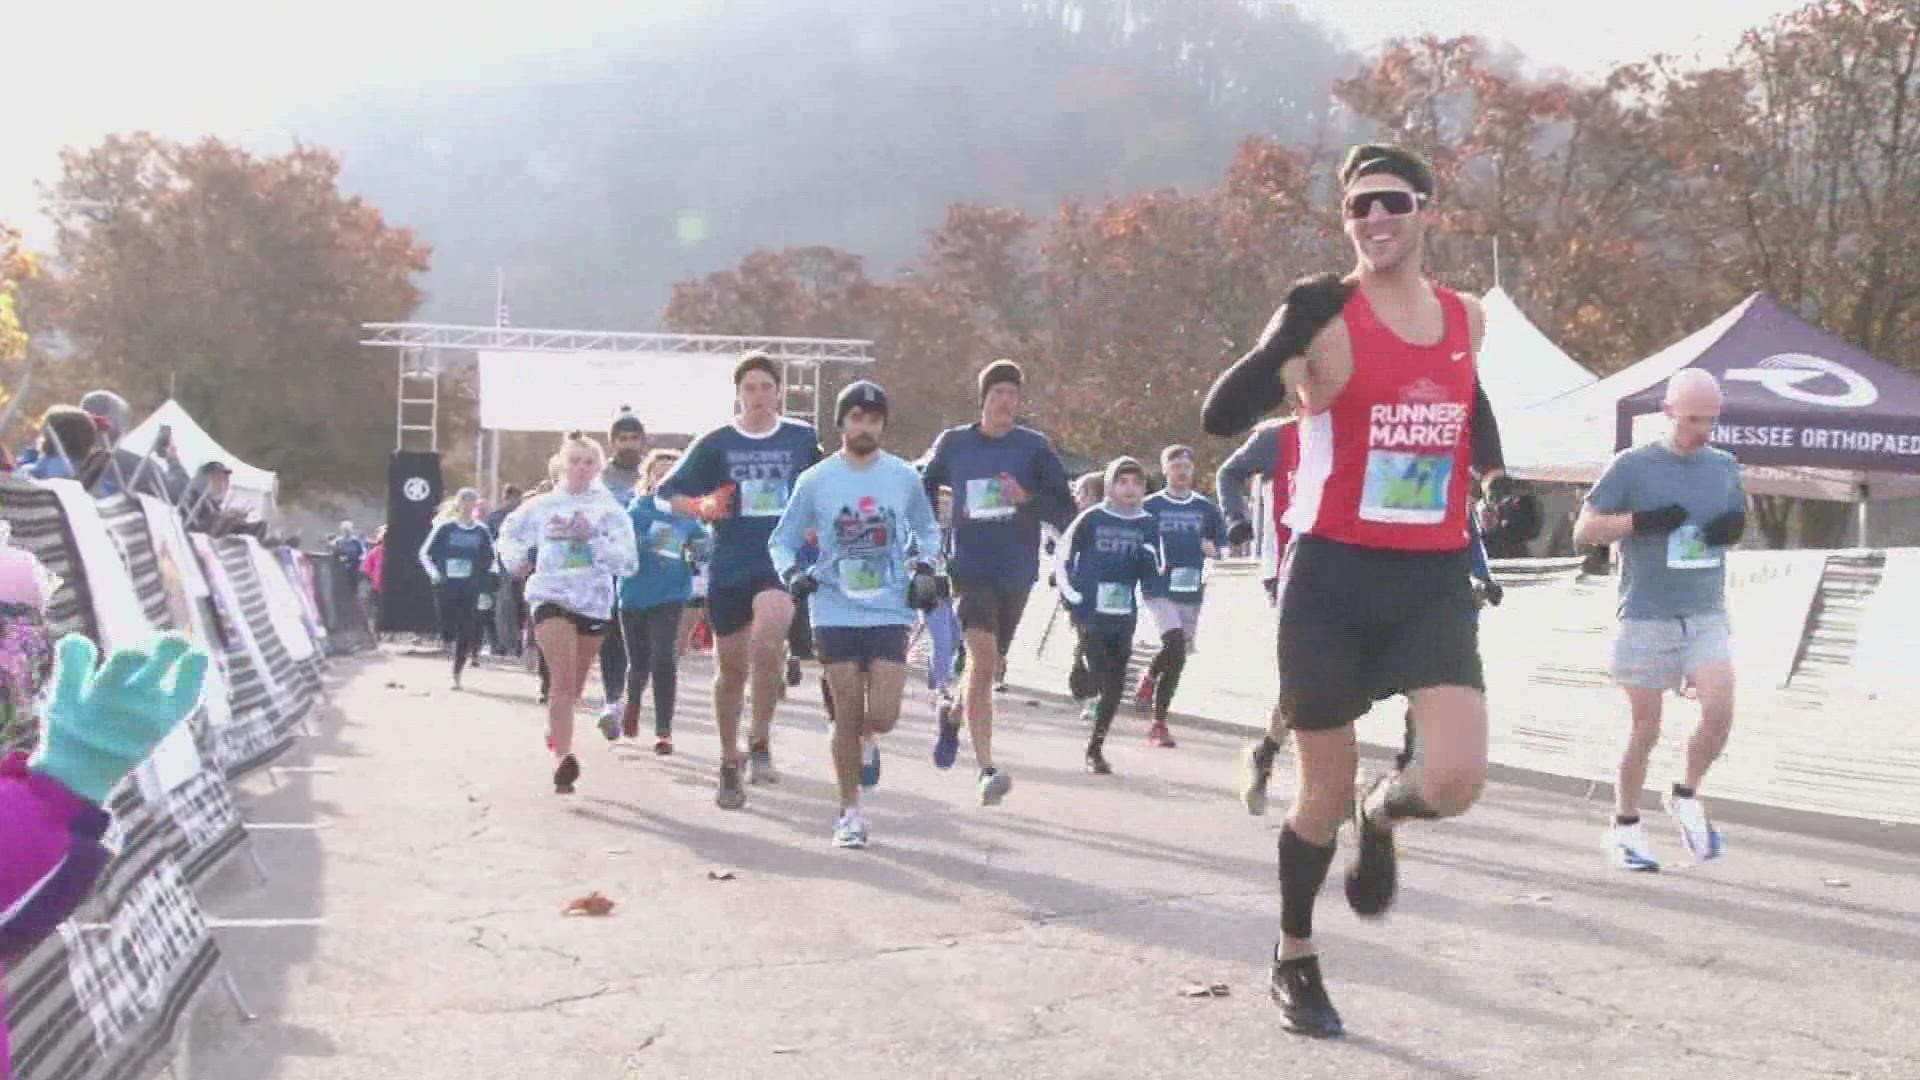 The races started at 9 a.m. Saturday and took runners through areas around Melton Hill Lake and Emory Valley Drive.